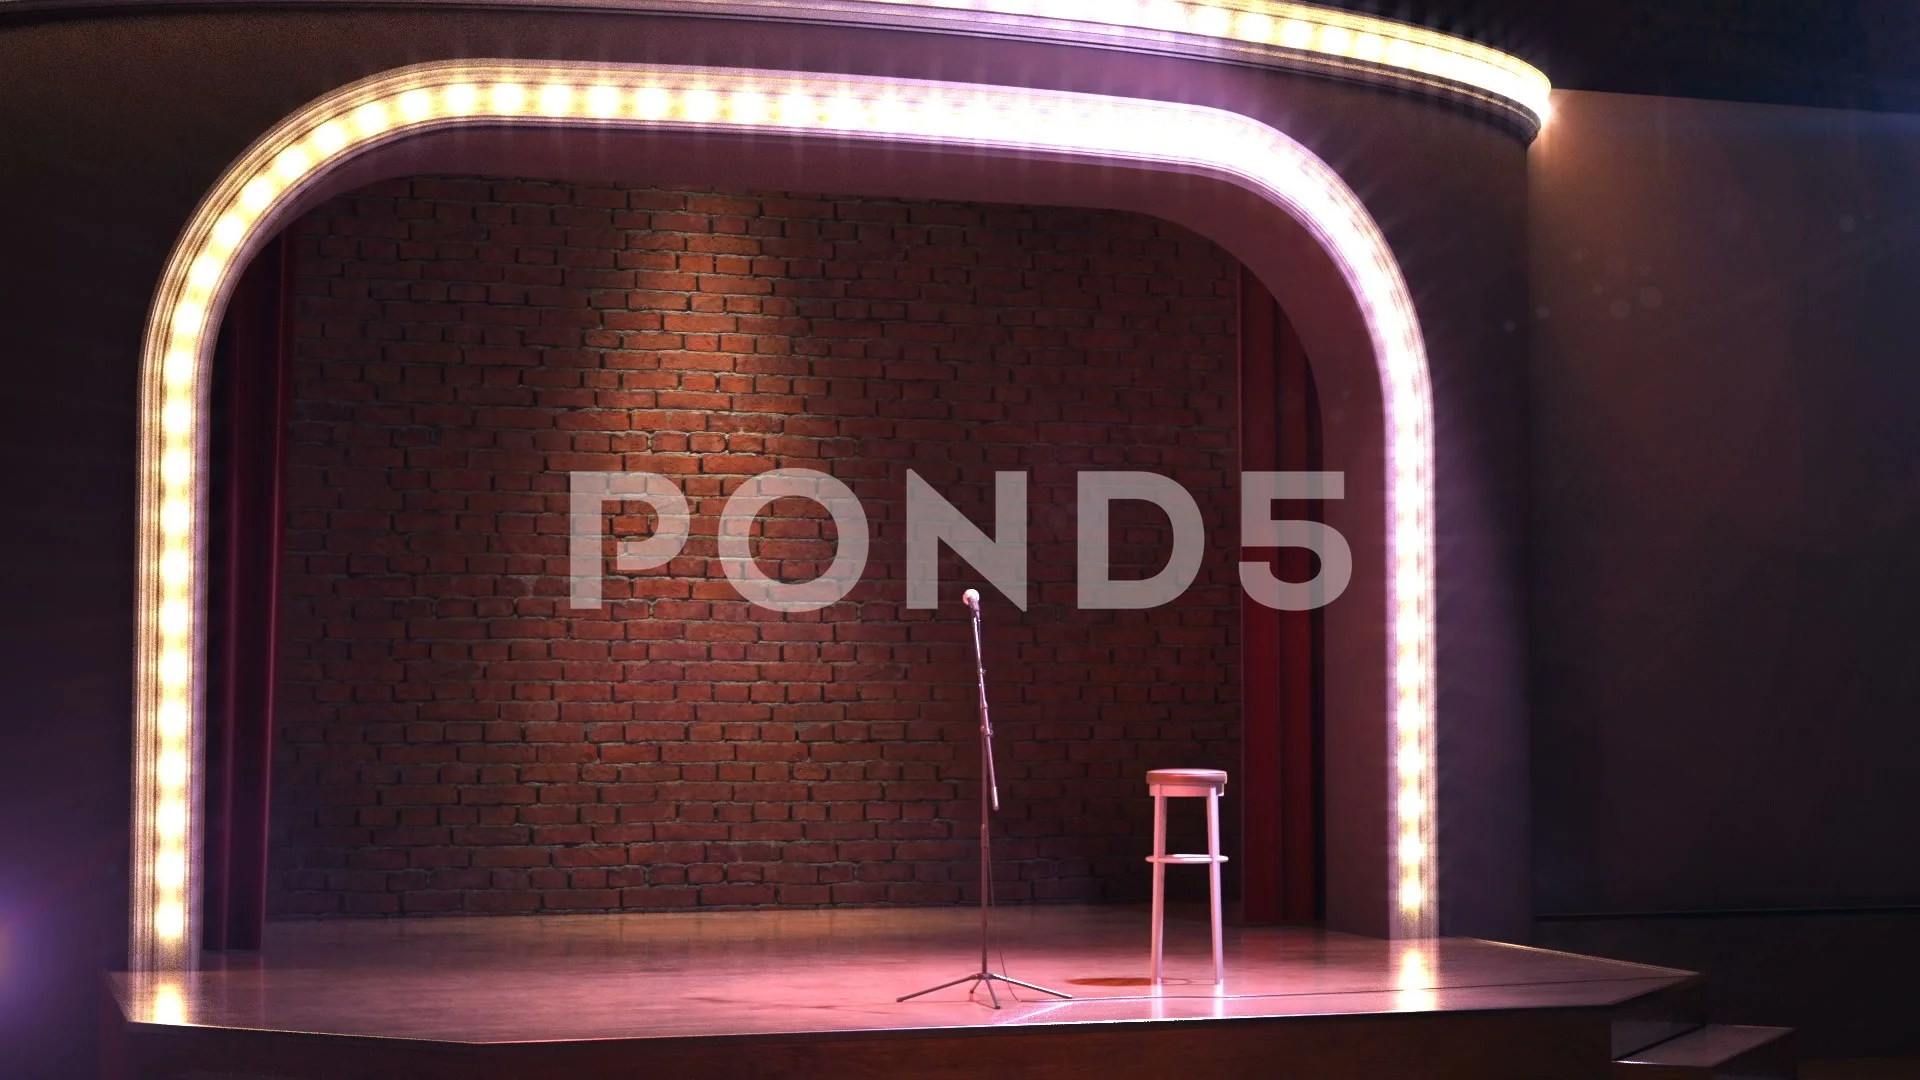 comedy stage background